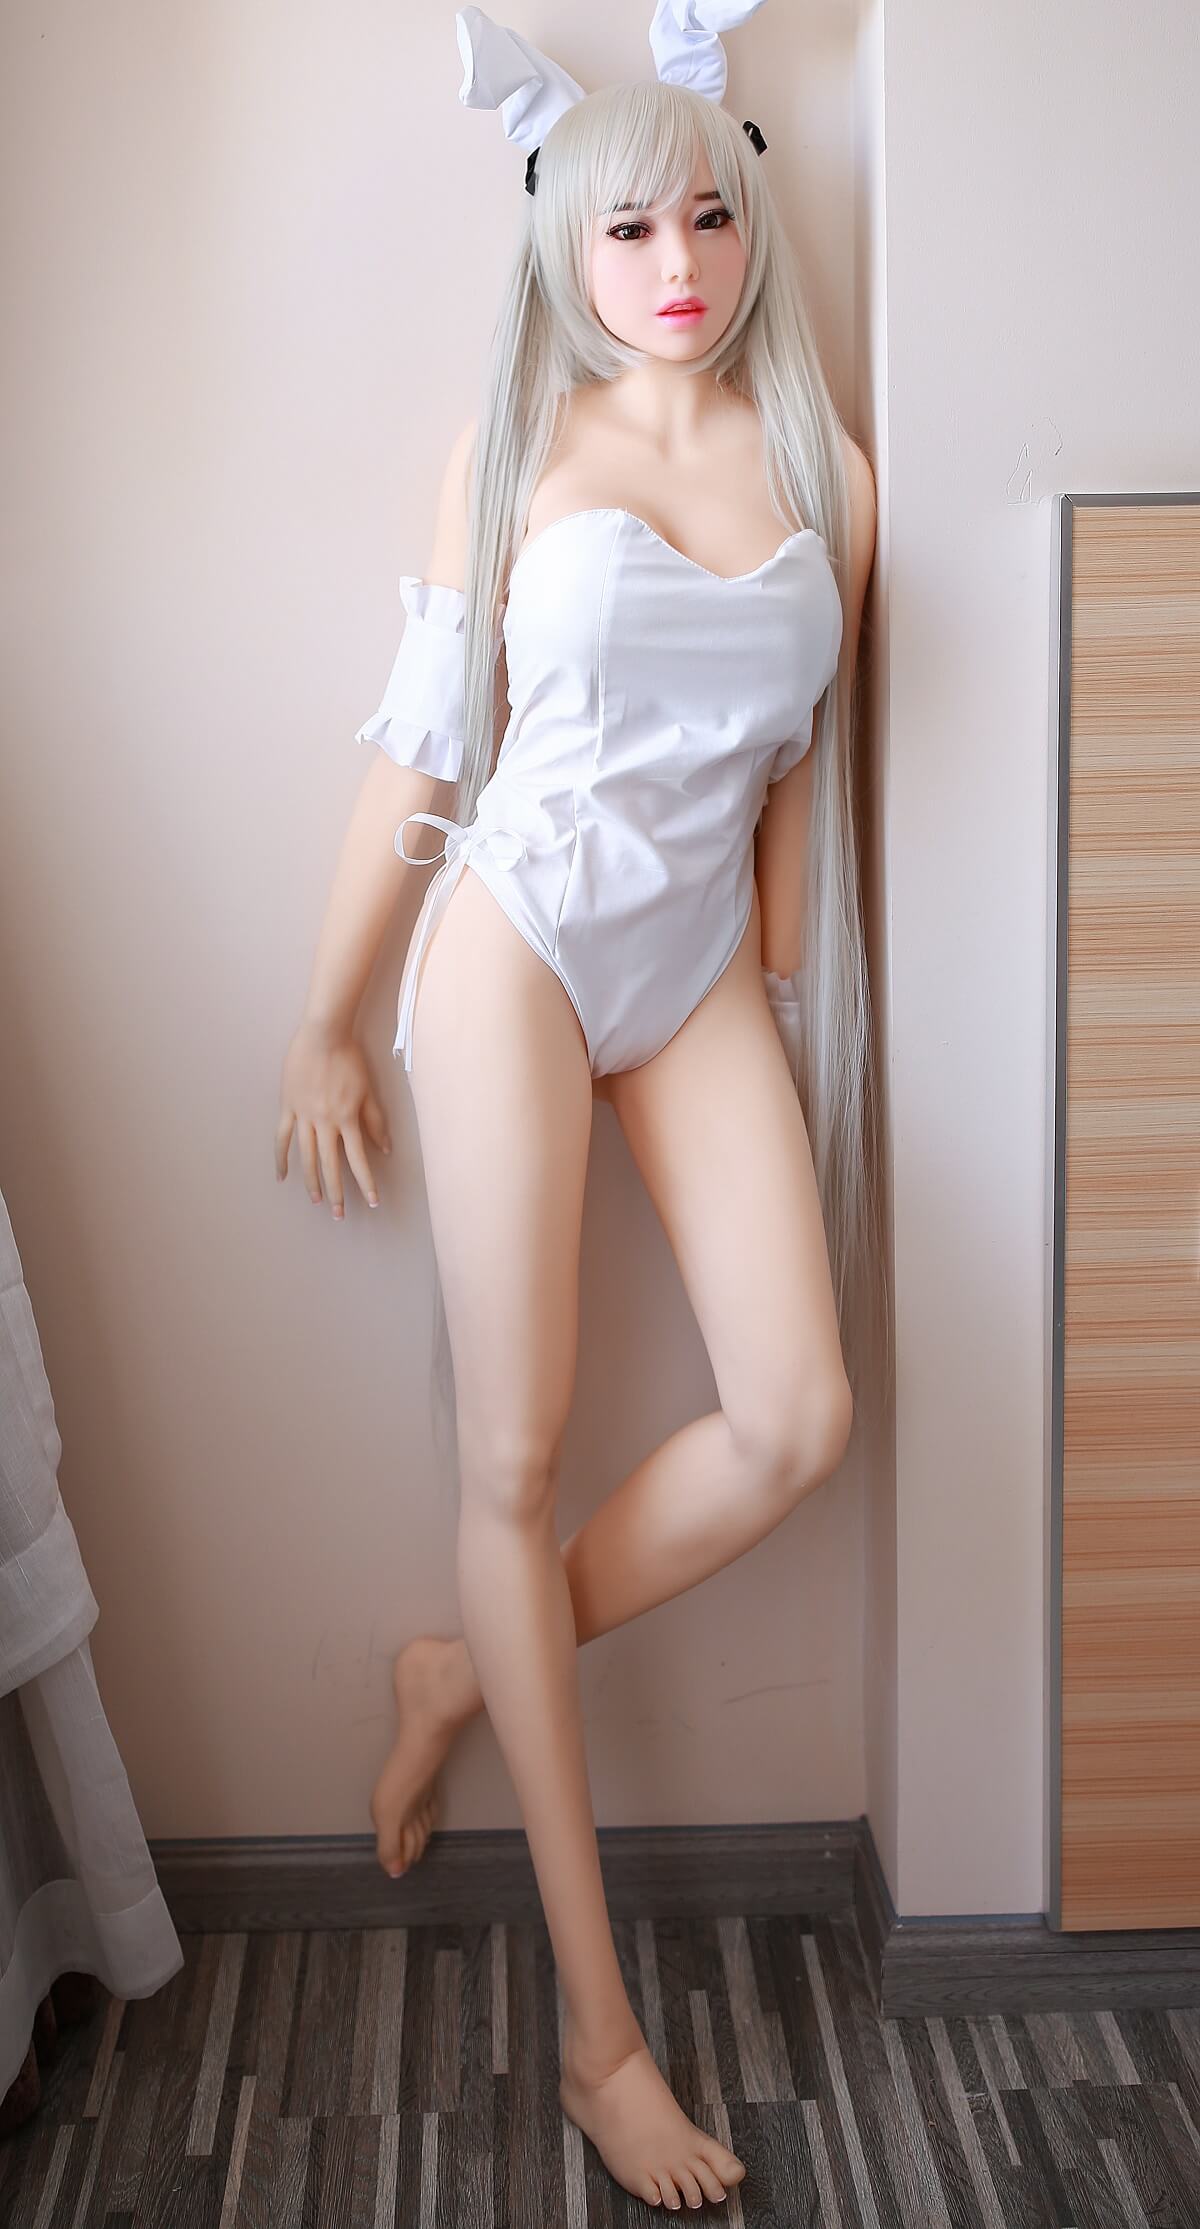 Marianne - Real Sex Doll 5ft 2in (158cm) - in stock - Love Dolls 4U